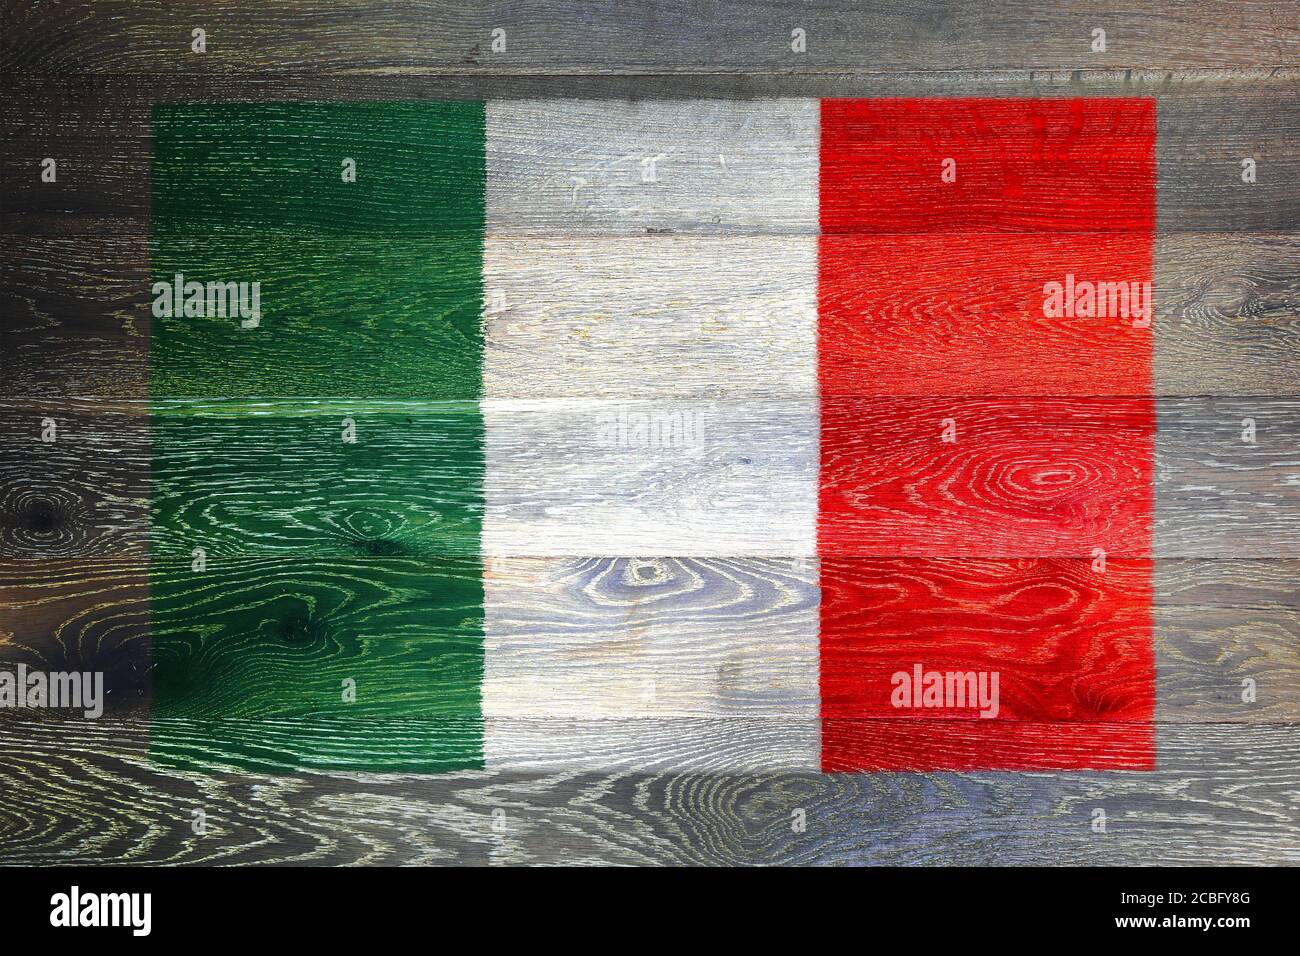 Italy flag on rustic old wood surface background Stock Photo